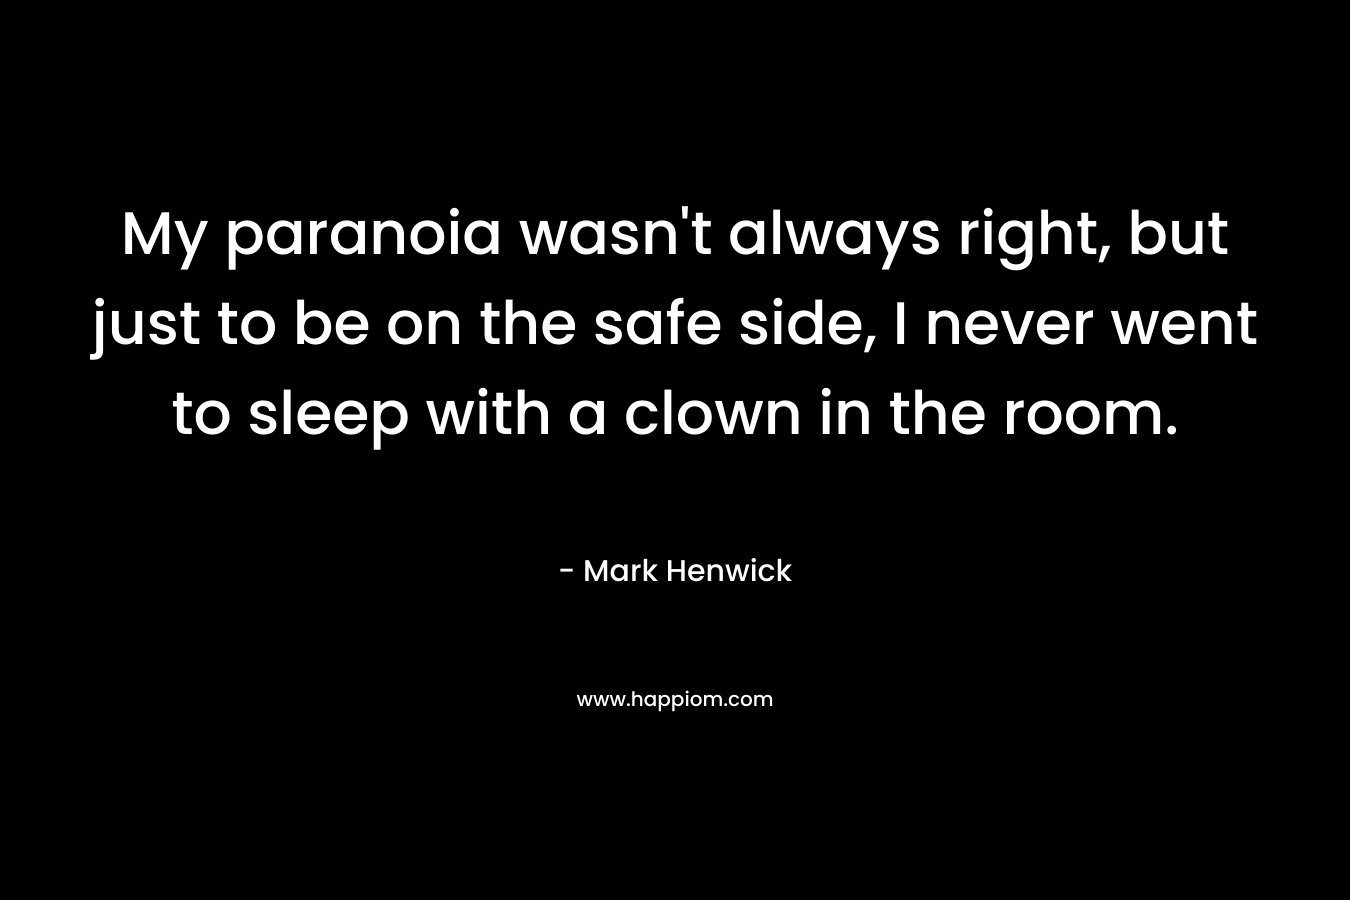 My paranoia wasn’t always right, but just to be on the safe side, I never went to sleep with a clown in the room. – Mark Henwick